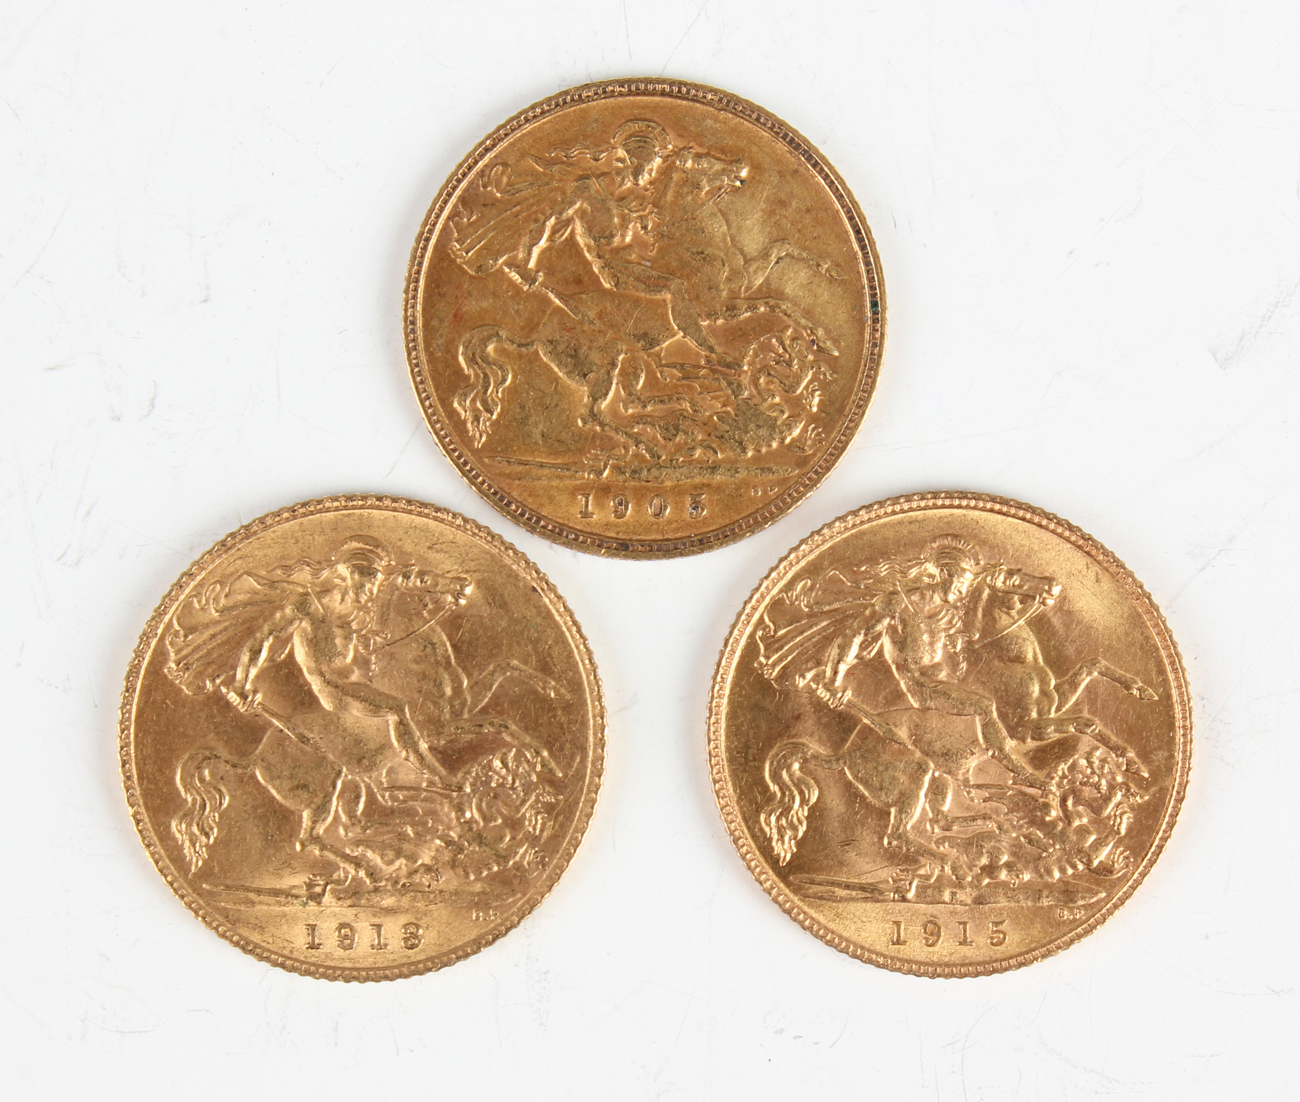 An Edward VII half-sovereign 1905 and two George V half-sovereigns, comprising 1913 and 1915 Perth